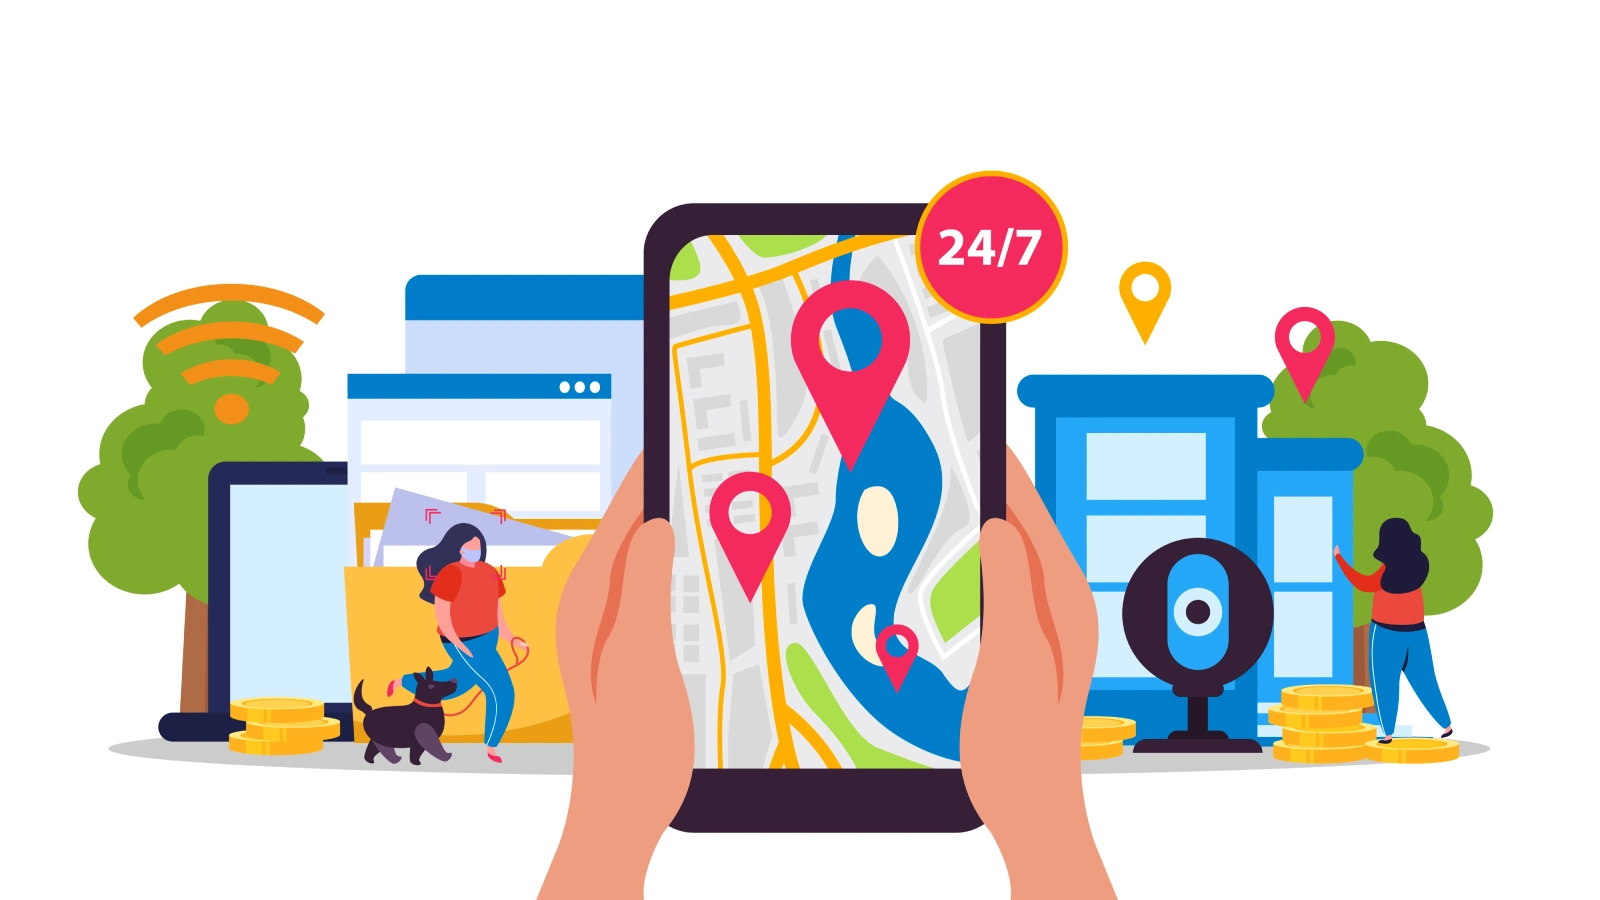 Google Business: Boost Visibility and Growth for Local Businesses